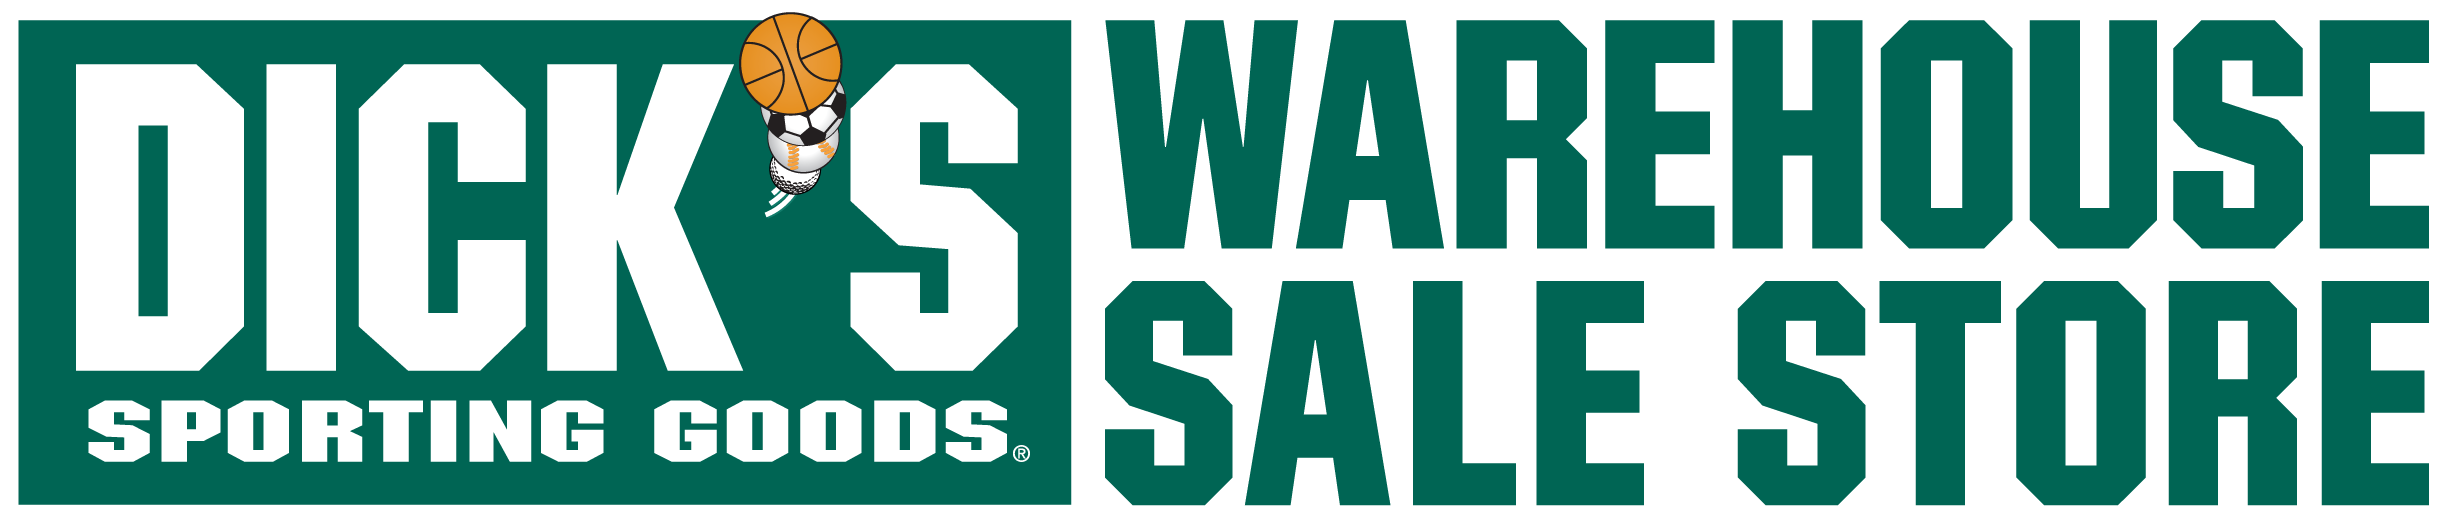 DICK’S SPORTING GOODS WAREHOUSE SALE